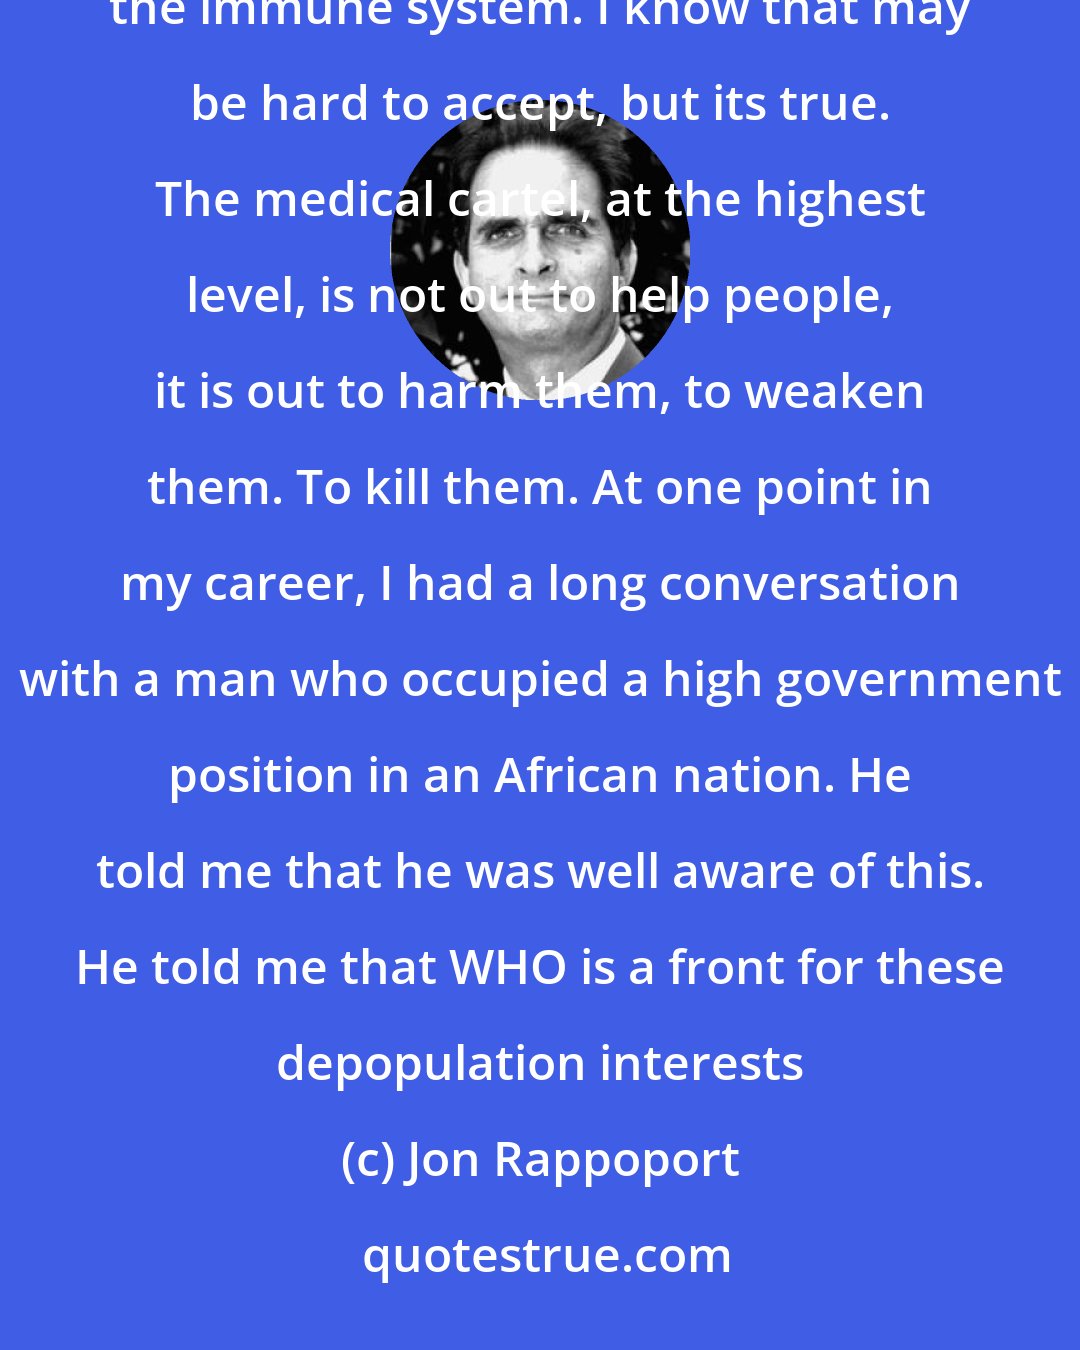 Jon Rappoport: At the highest levels of the medical cartel, vaccines are a top priority because they cause a weakening of the immune system. I know that may be hard to accept, but its true. The medical cartel, at the highest level, is not out to help people, it is out to harm them, to weaken them. To kill them. At one point in my career, I had a long conversation with a man who occupied a high government position in an African nation. He told me that he was well aware of this. He told me that WHO is a front for these depopulation interests